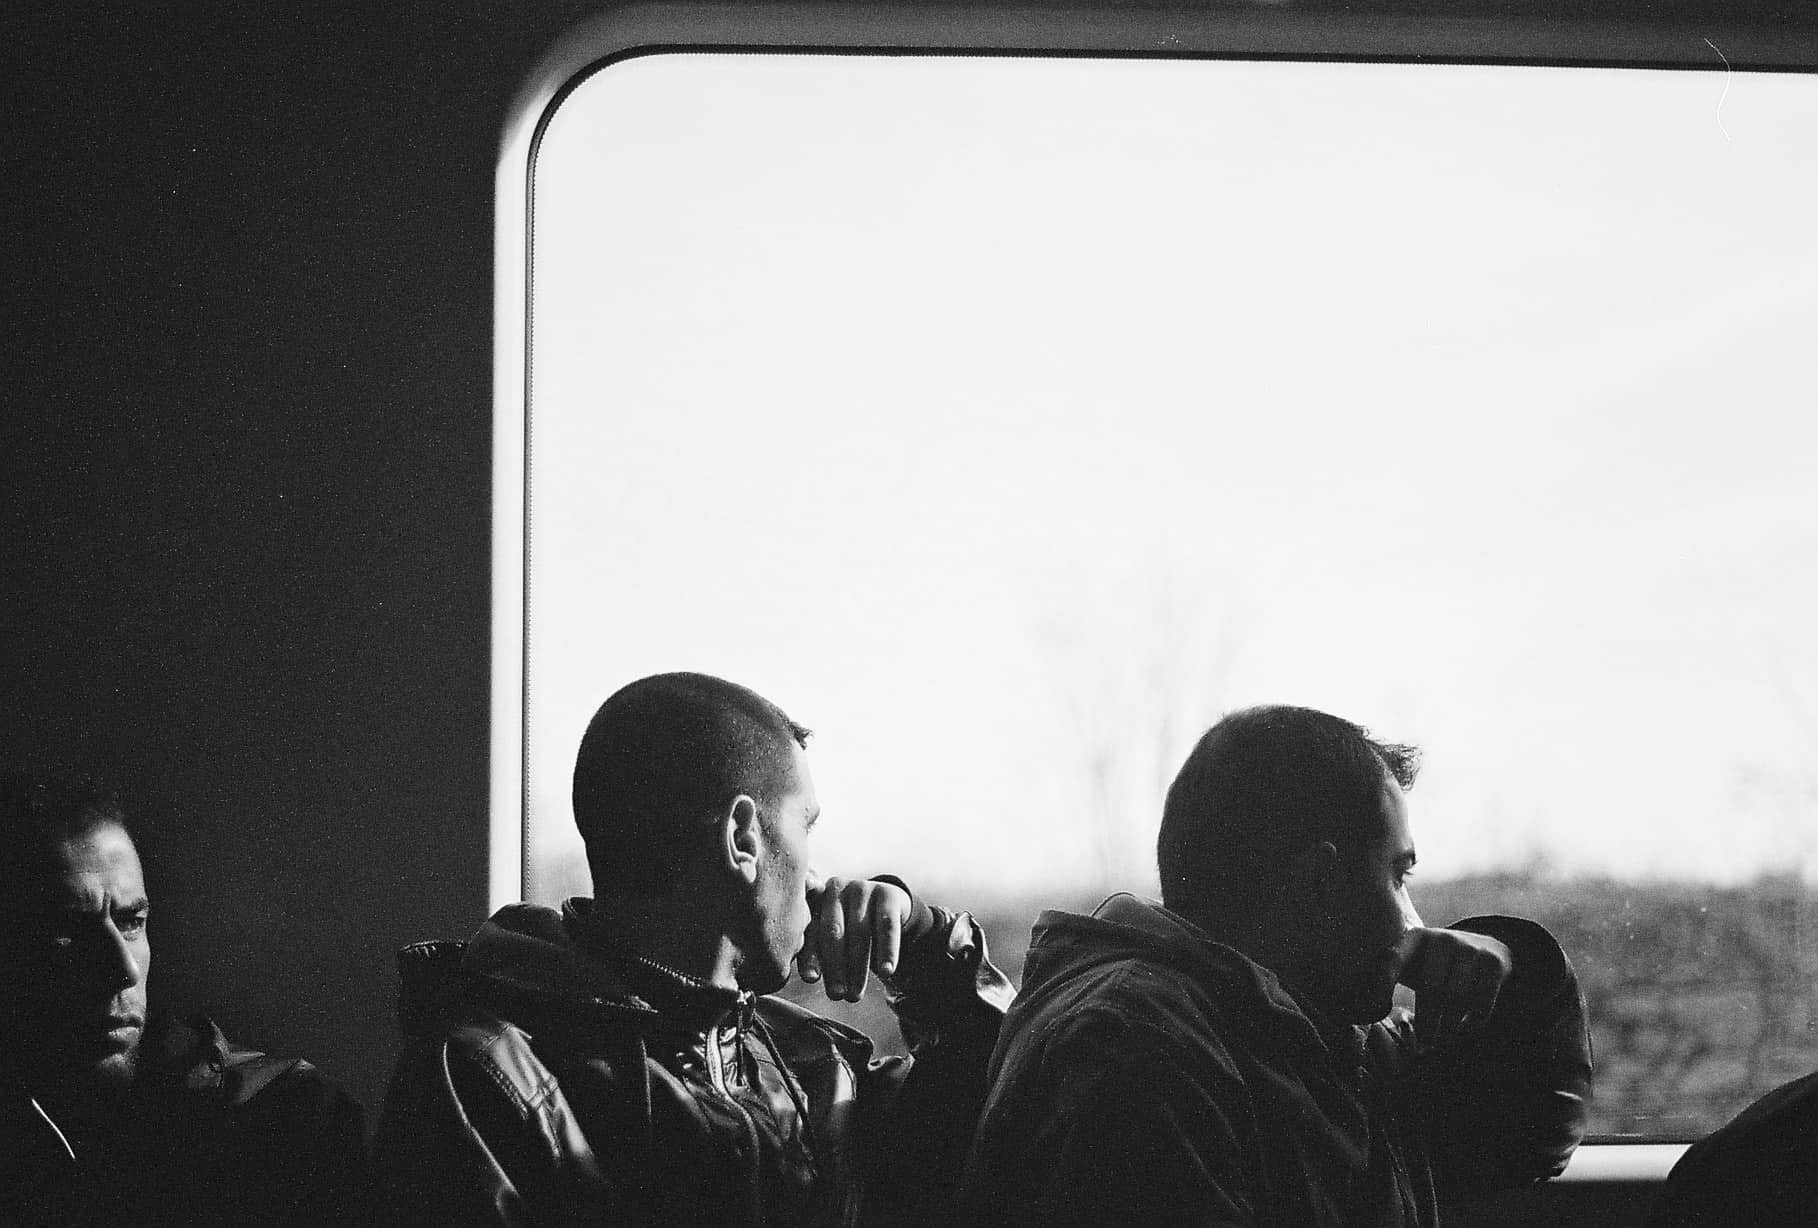 Men on the Train, Istanbul (Istanbul in Black-and-White)